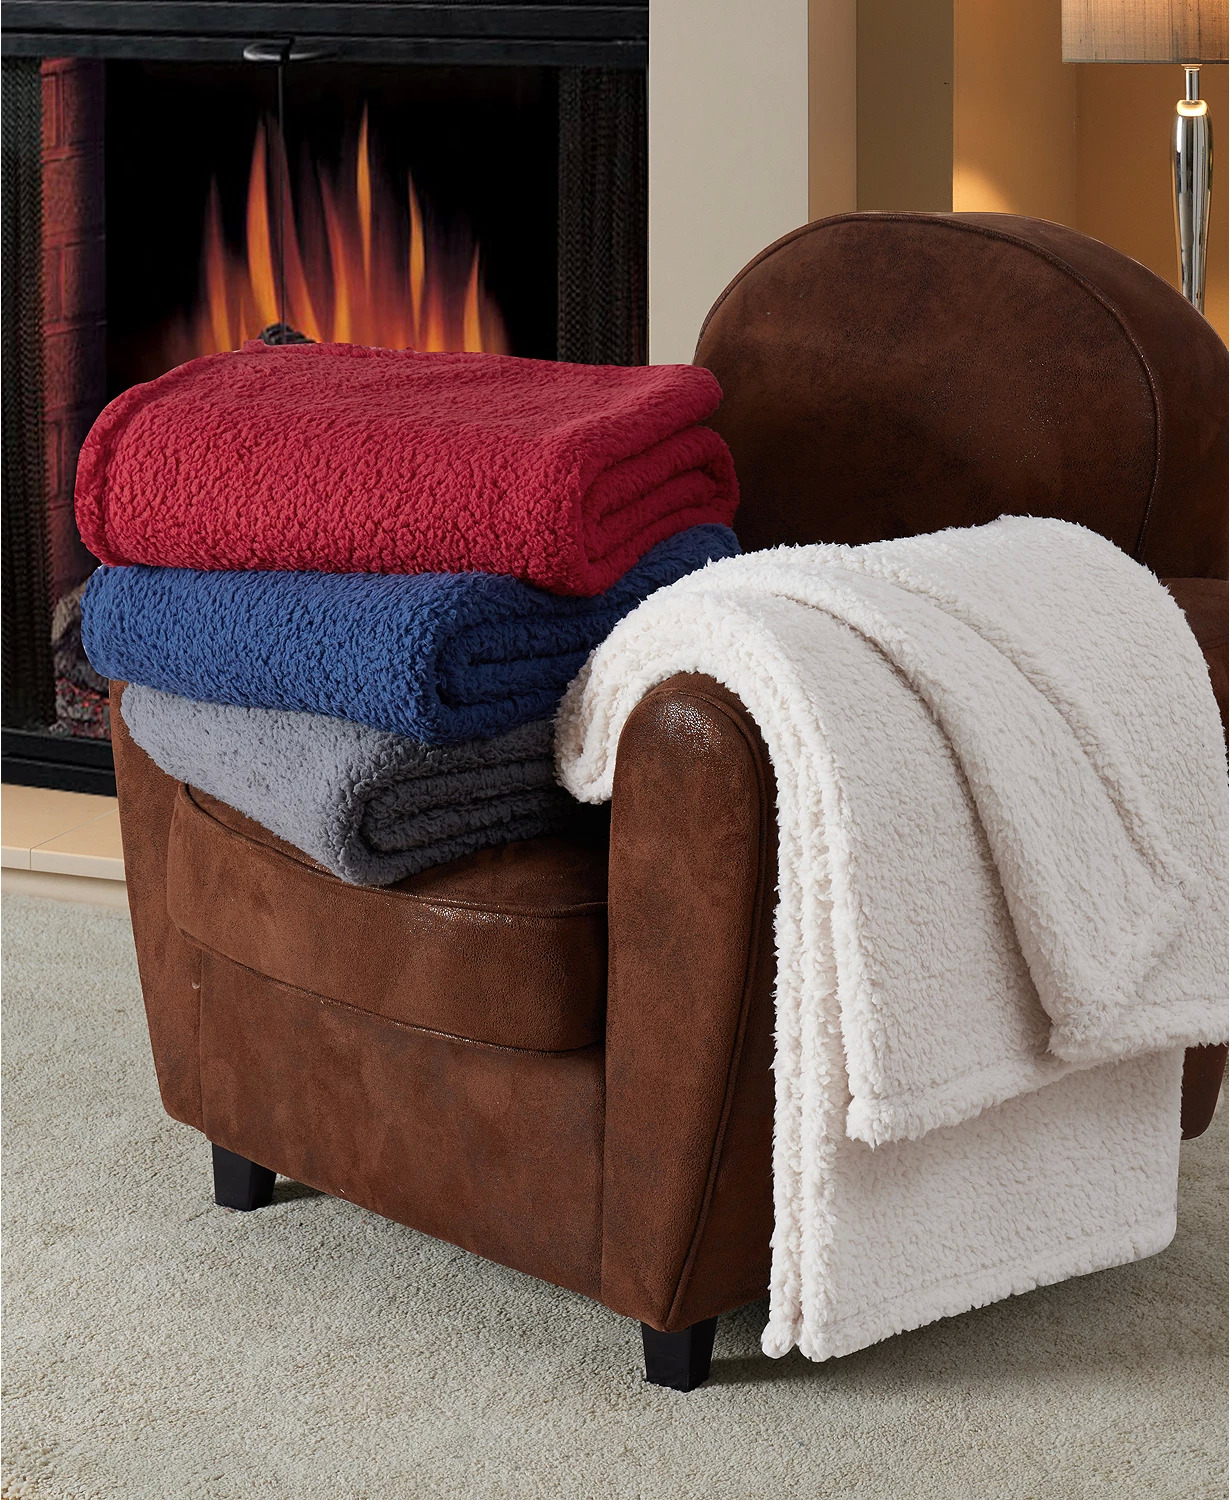 50" x 60" Fireside Sherpa Throw Blanket (Solid or Plaid) $7.45 & More + SD Cashback + Free Store Pickup at Macy's or FS on $25+